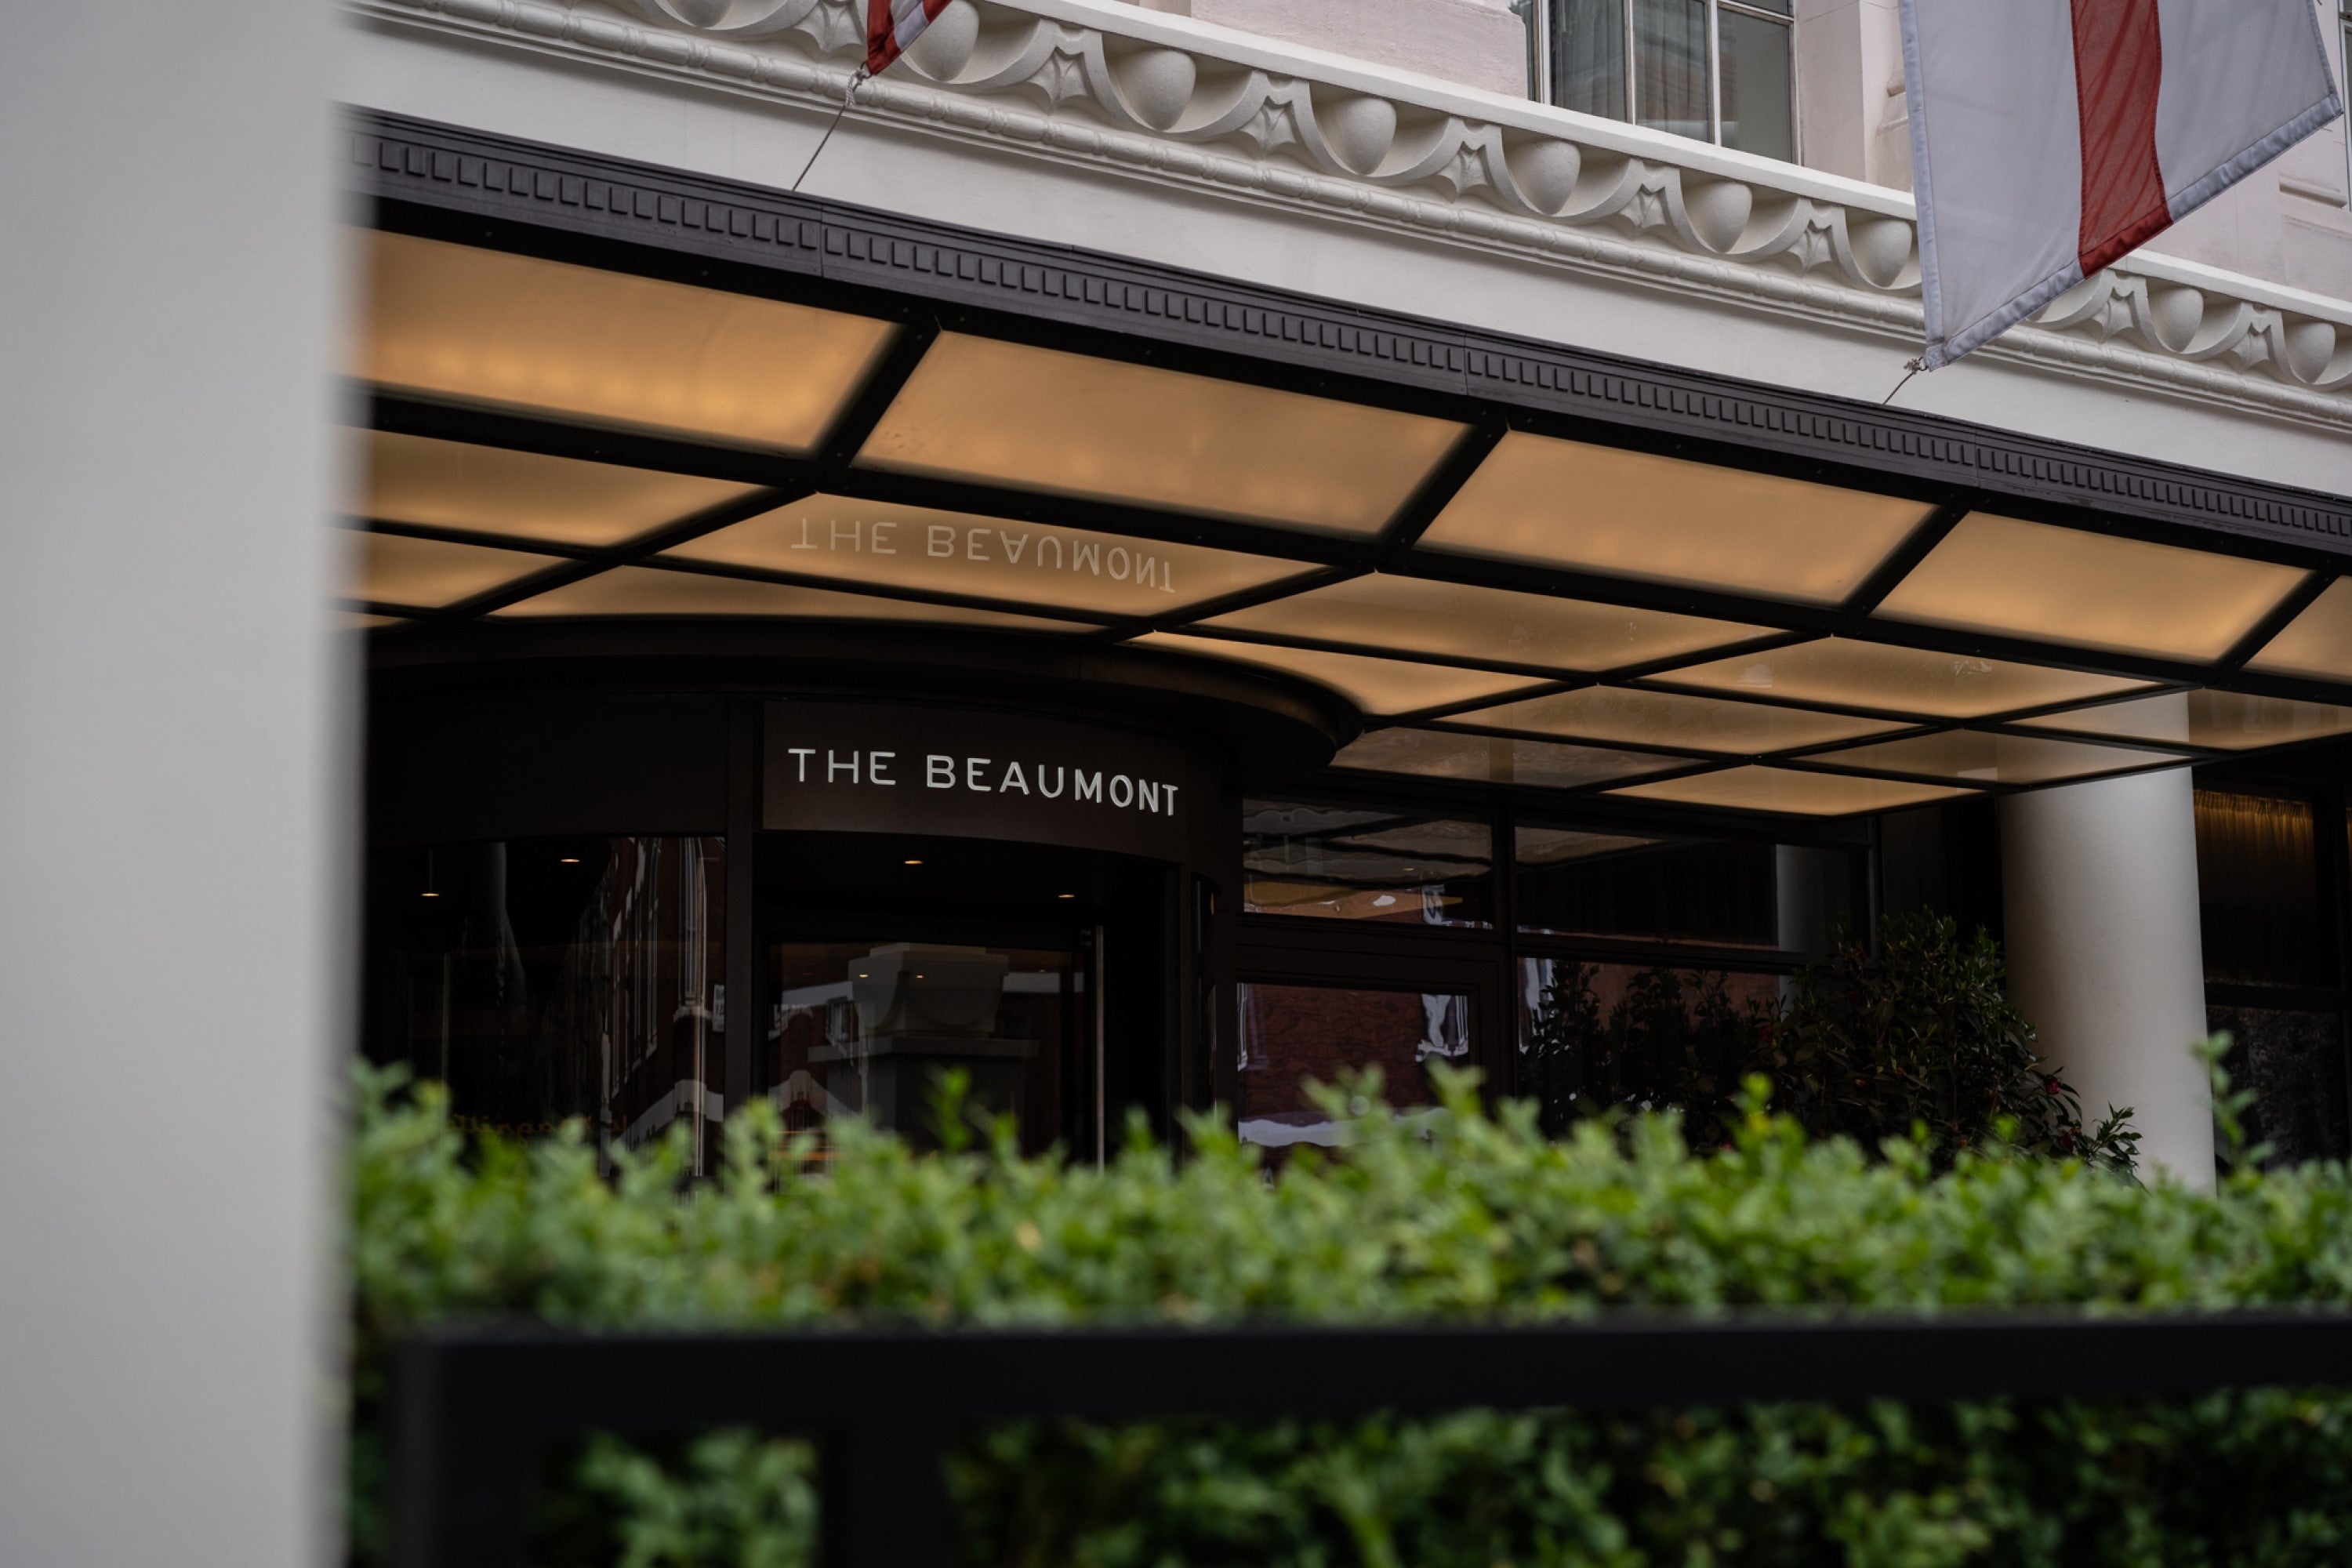 The Beaumont Hotel, London